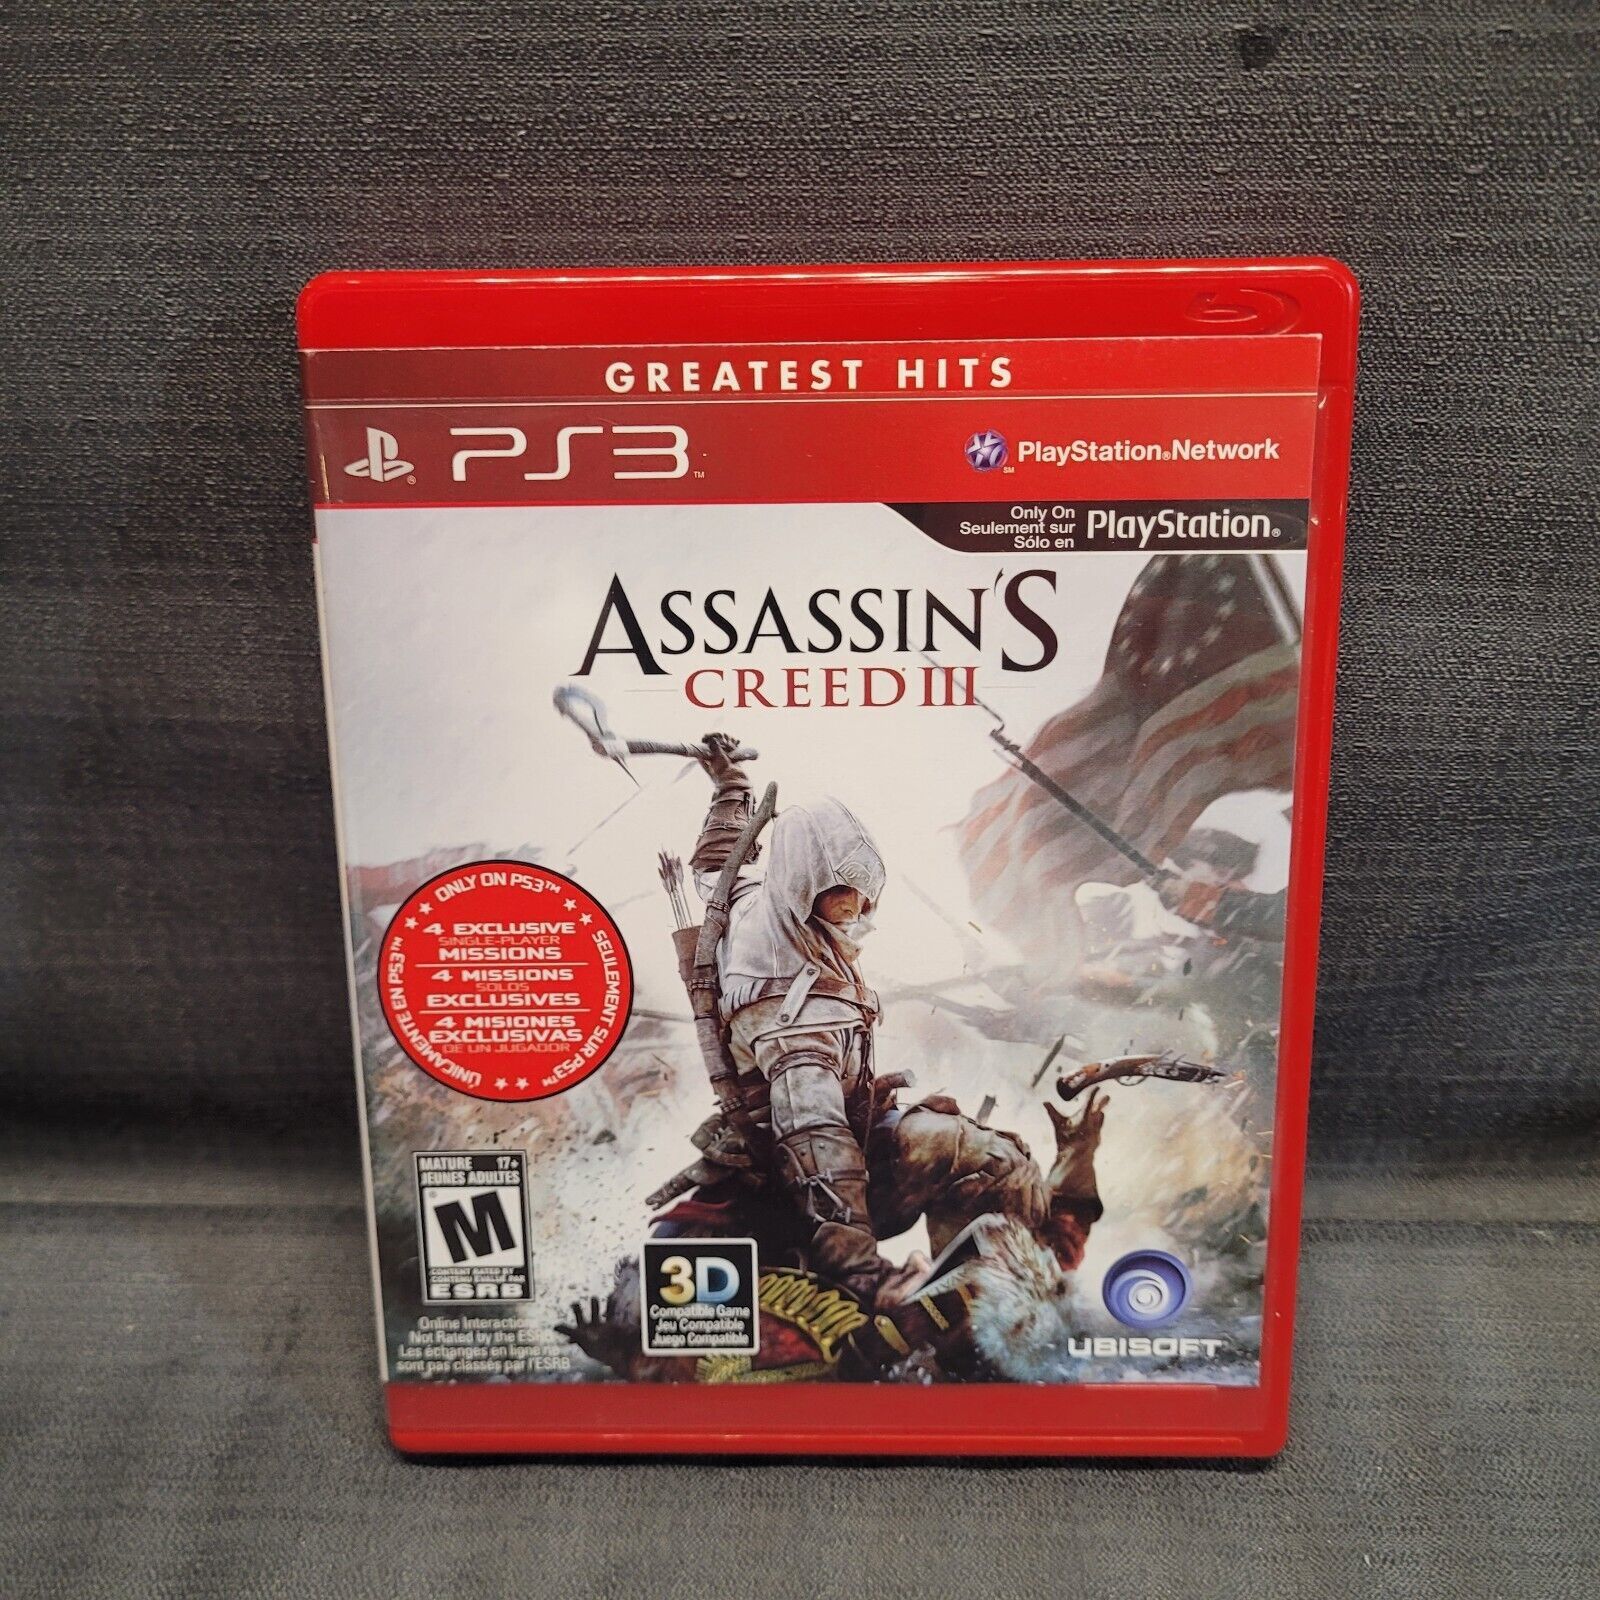 Assassin's Creed III Greatest Hits (Sony PlayStation 3, 2012) PS3 Video Game - $5.94